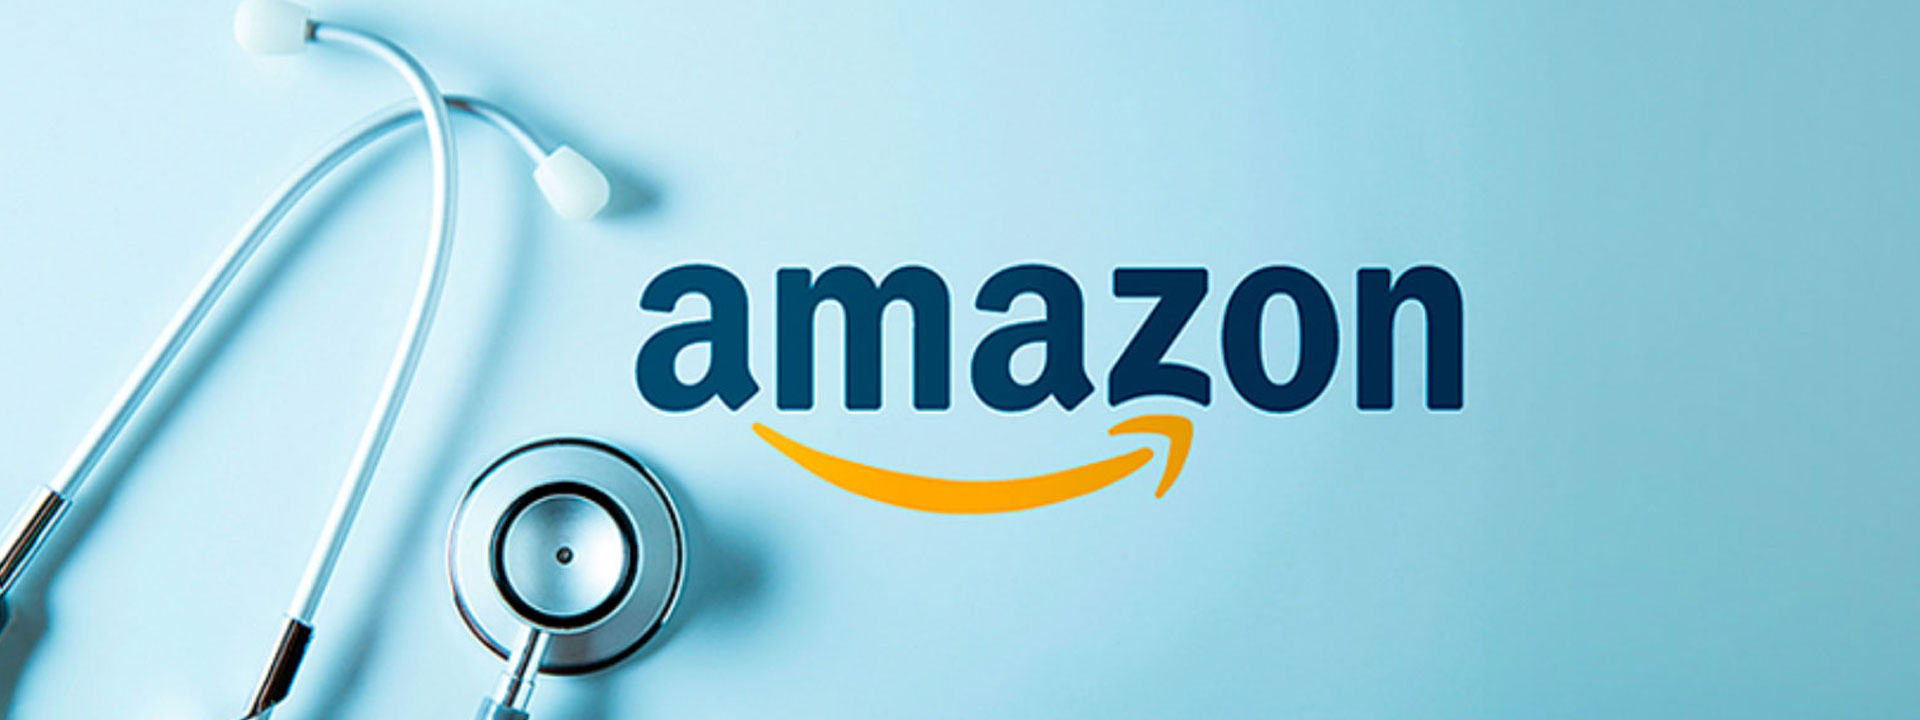 CG42 - Amazon could roll expanded healthcare plans, services into Prime: experts